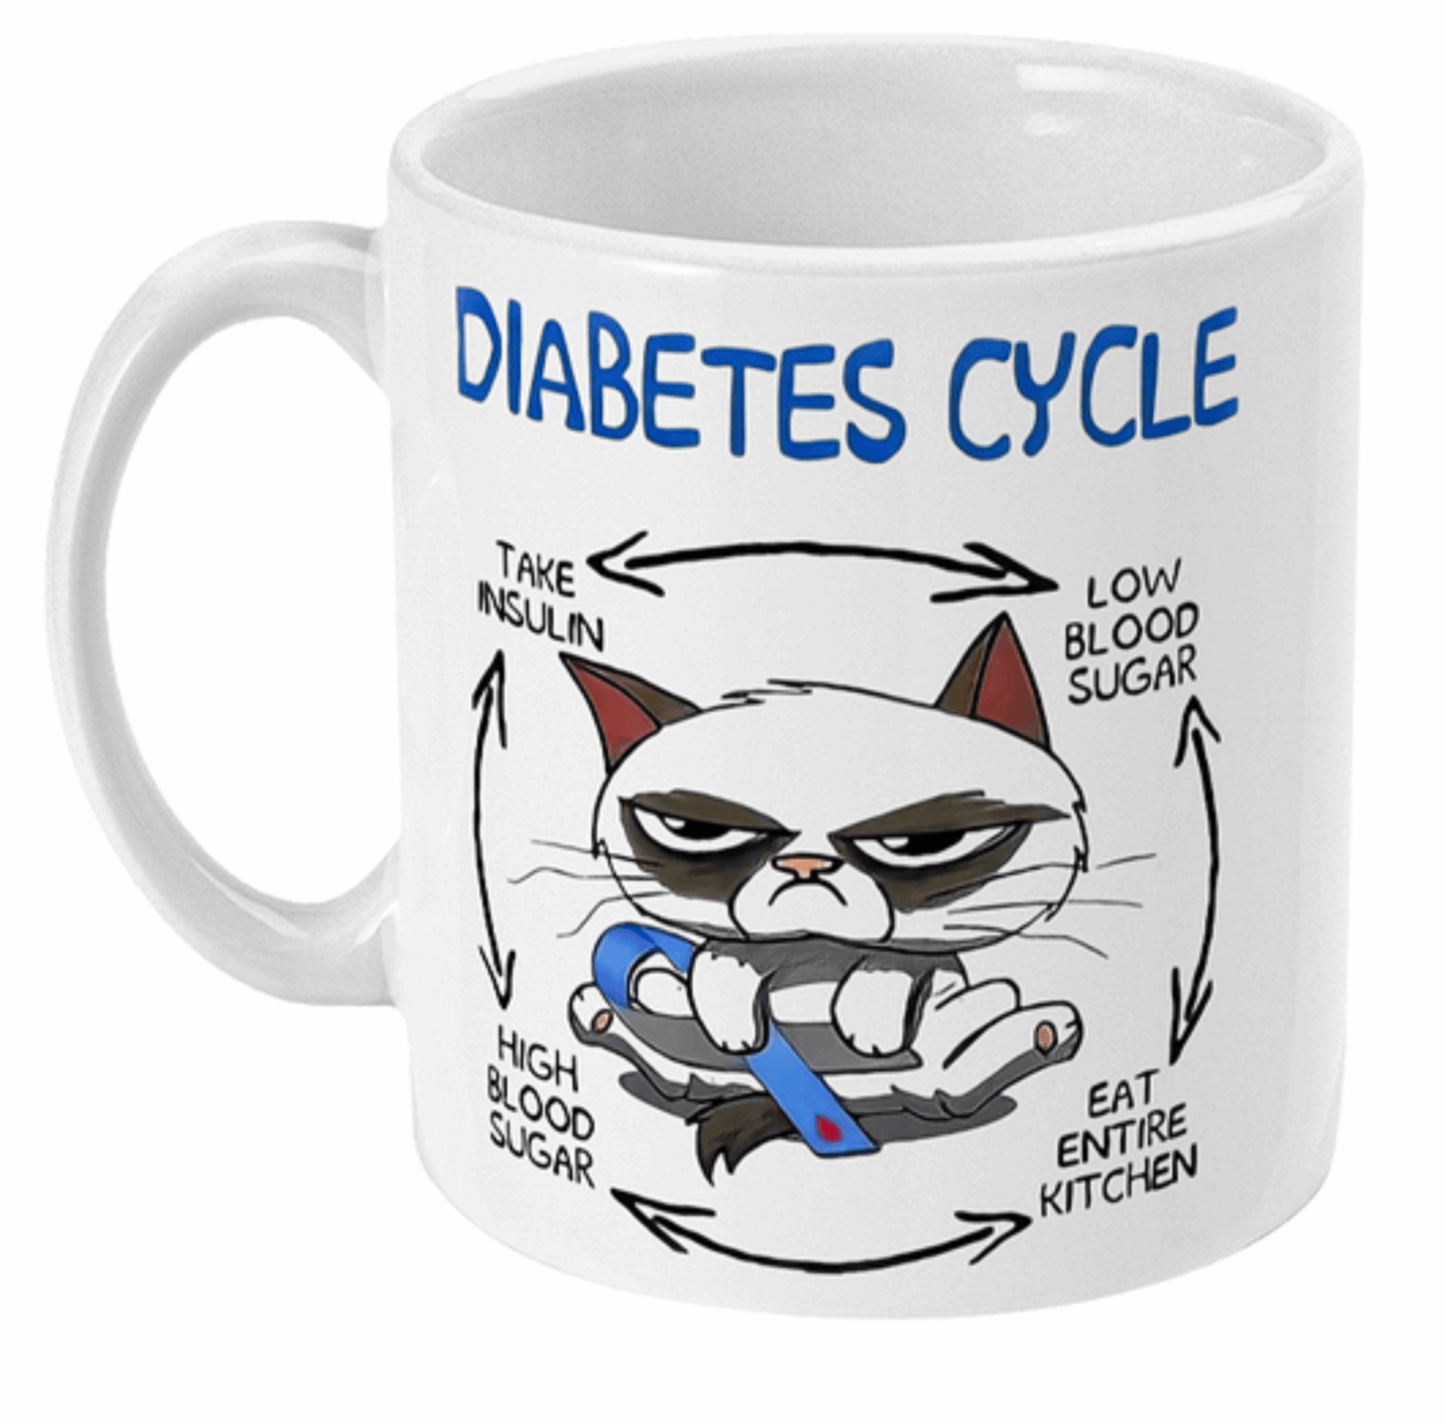  The Diabetes Cycle with Sad Cat Mug by Free Spirit Accessories sold by Free Spirit Accessories